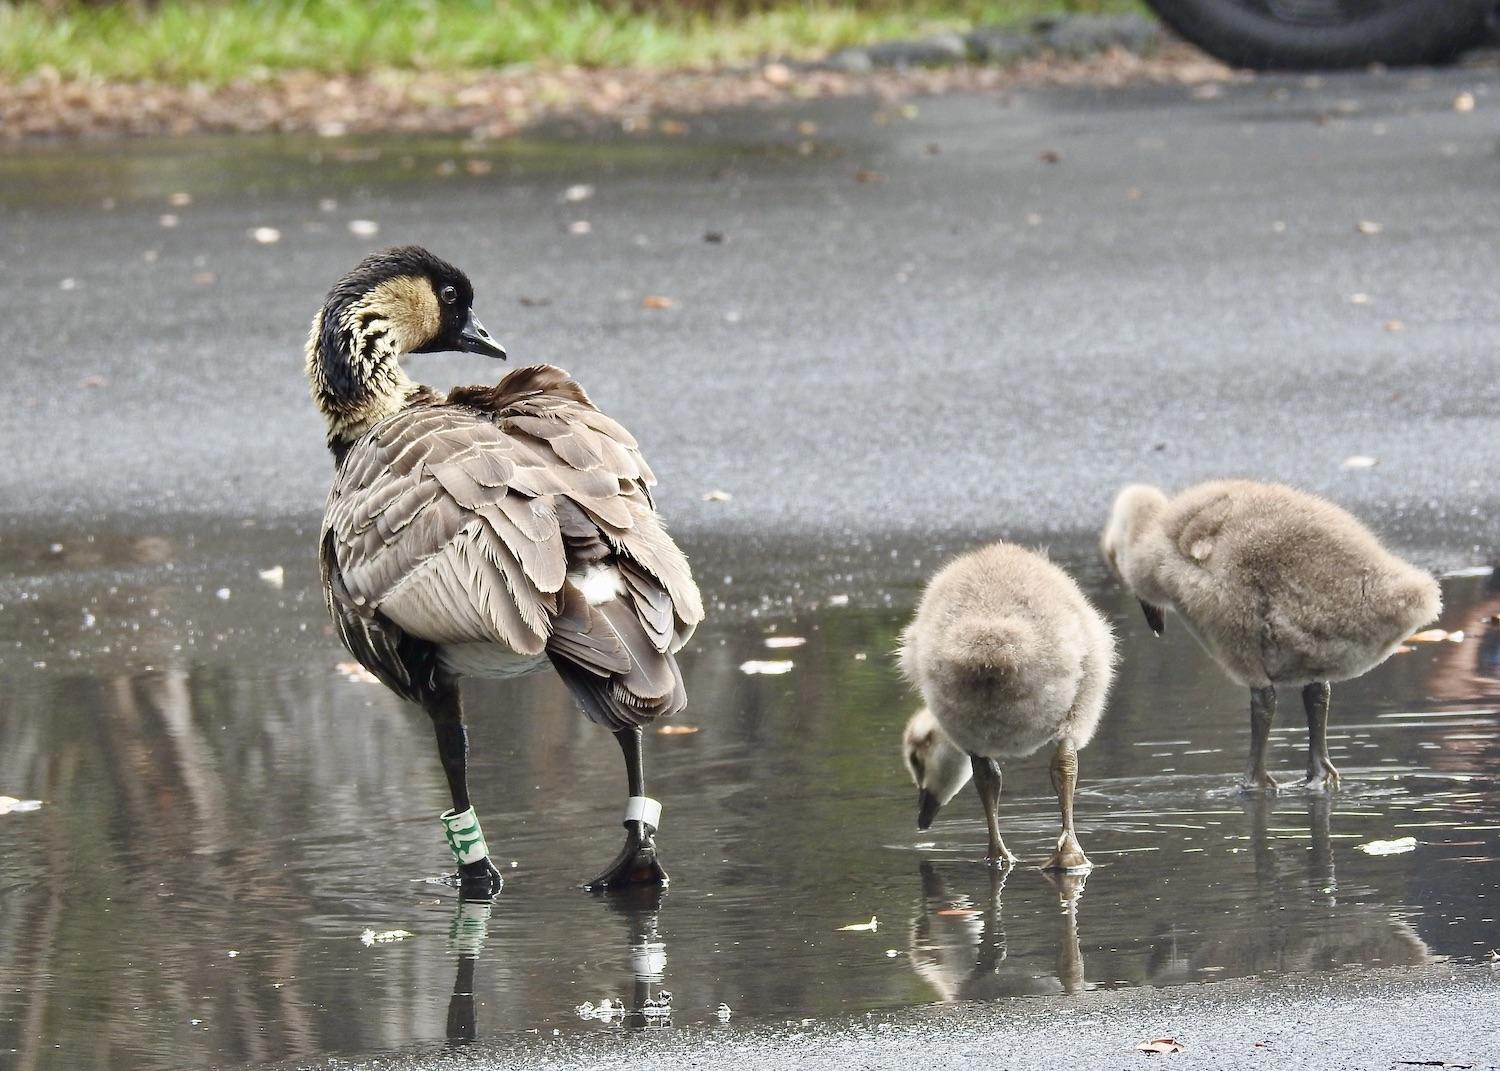 A rear view of three members of a nēnē family in a parking lot puddle.